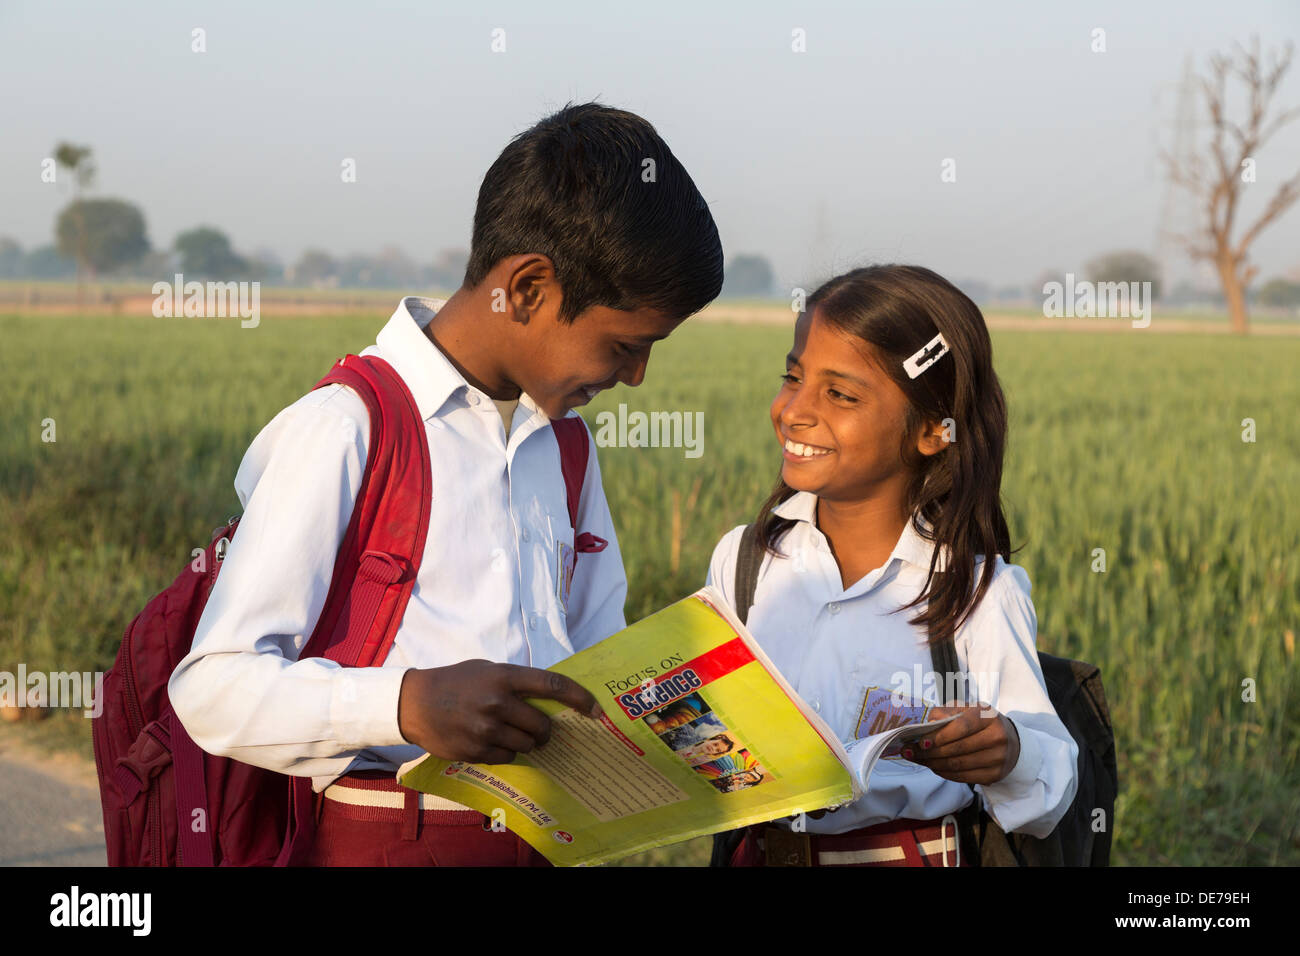 India, Uttar Pradesh, Agra, young brother & sister in school uniform looking at text books Stock Photo